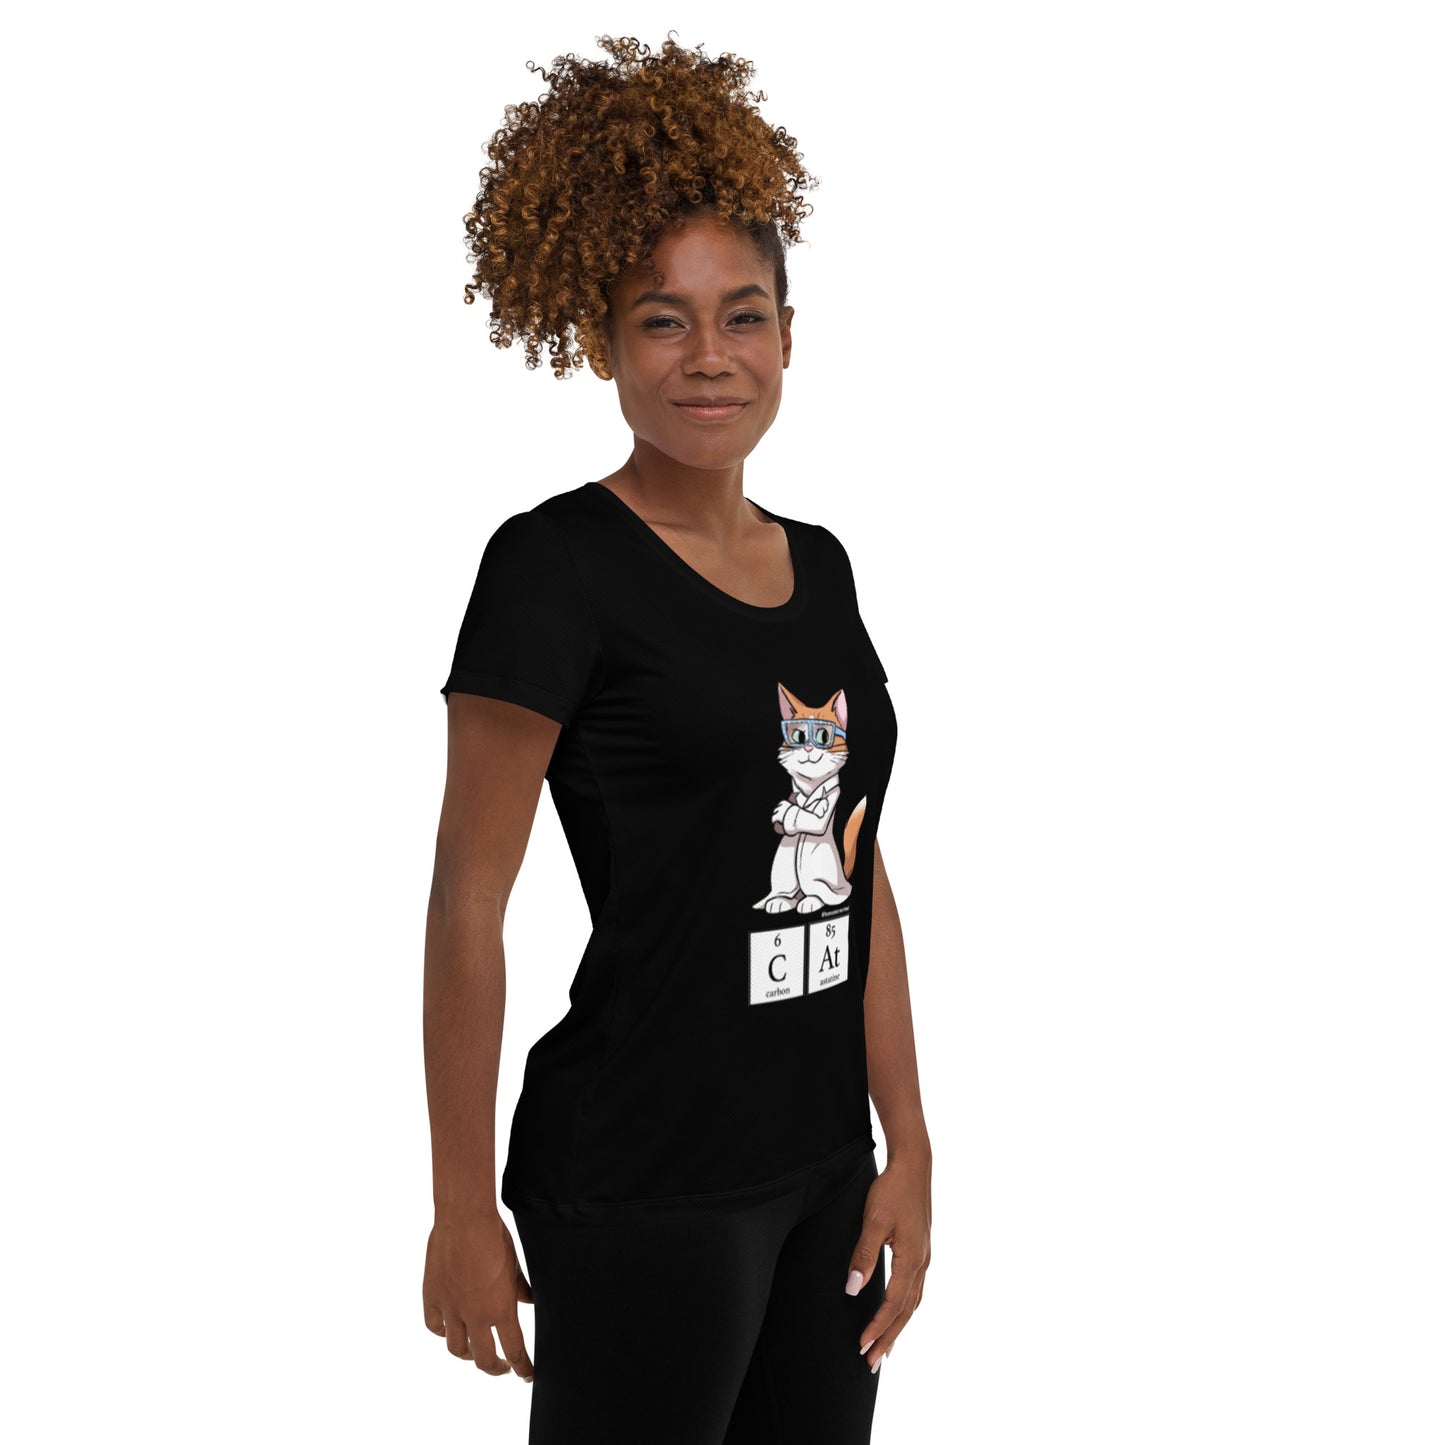 All-Over Print Women's Athletic T-shirt: CAT!